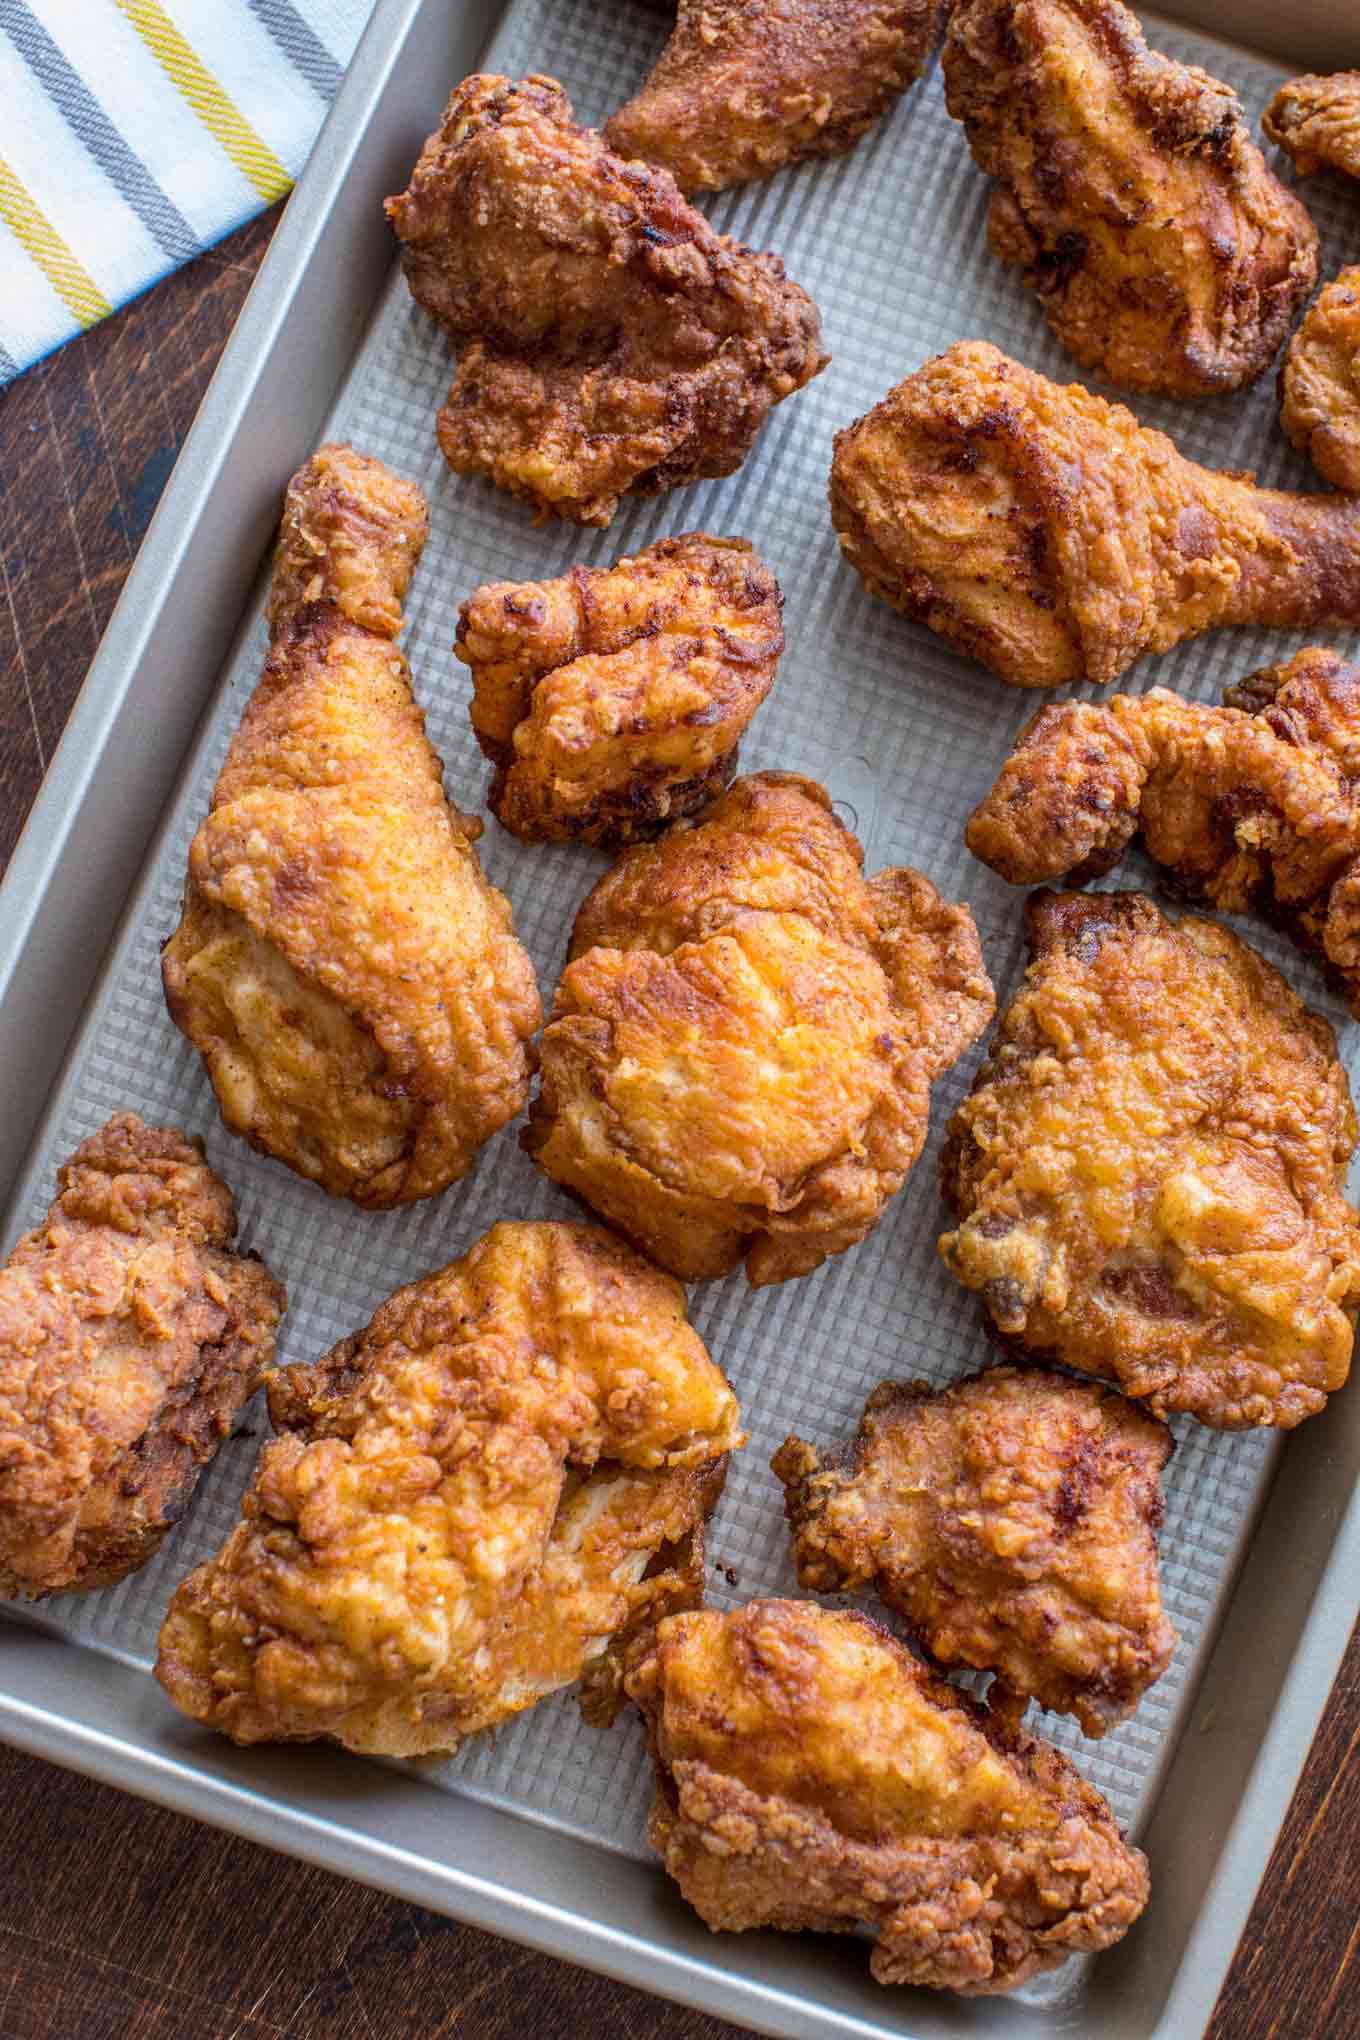 Fried Chicken Recipe [Video] - Sweet and Savory Meals